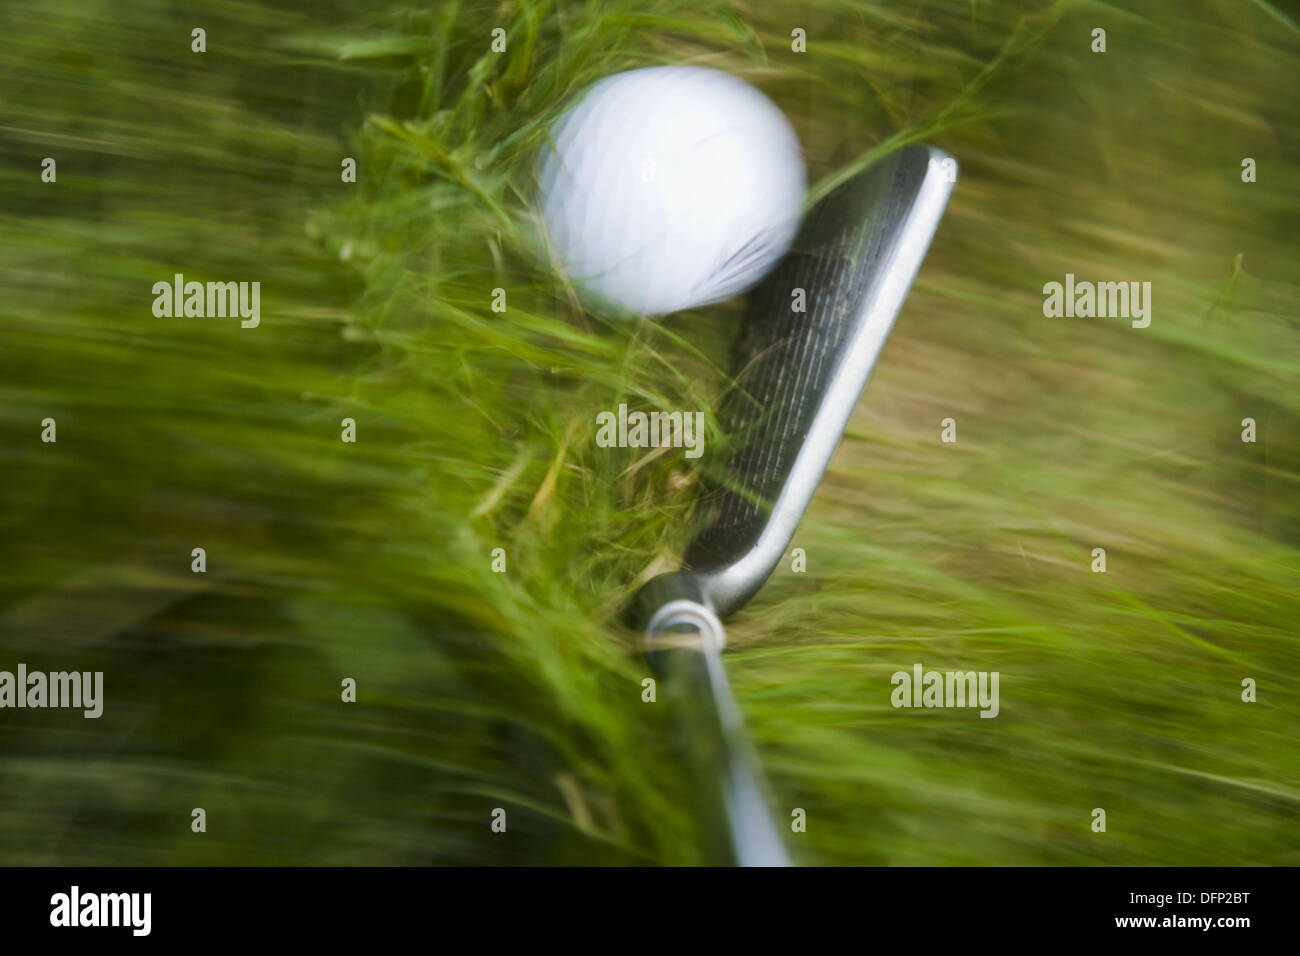 GOLF Blurred motion of club and golf ball in heavy grass on course in Deerfield, Illinois Stock Photo